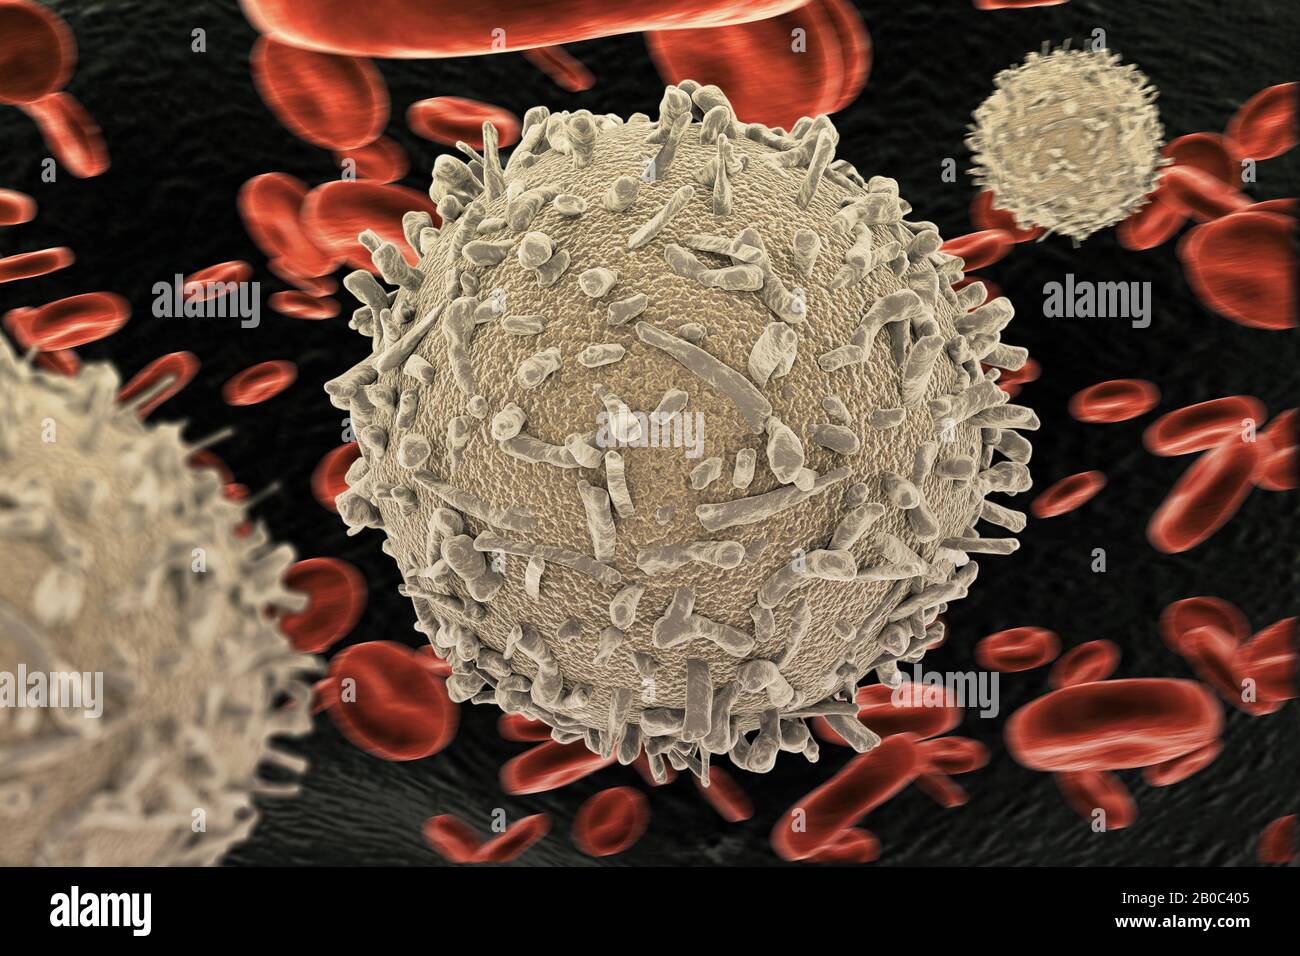 White blood cells (WBCs), also called leukocytes or leucocytes, are the cells of the immune system that are involved in protecting the body against bo Stock Photo